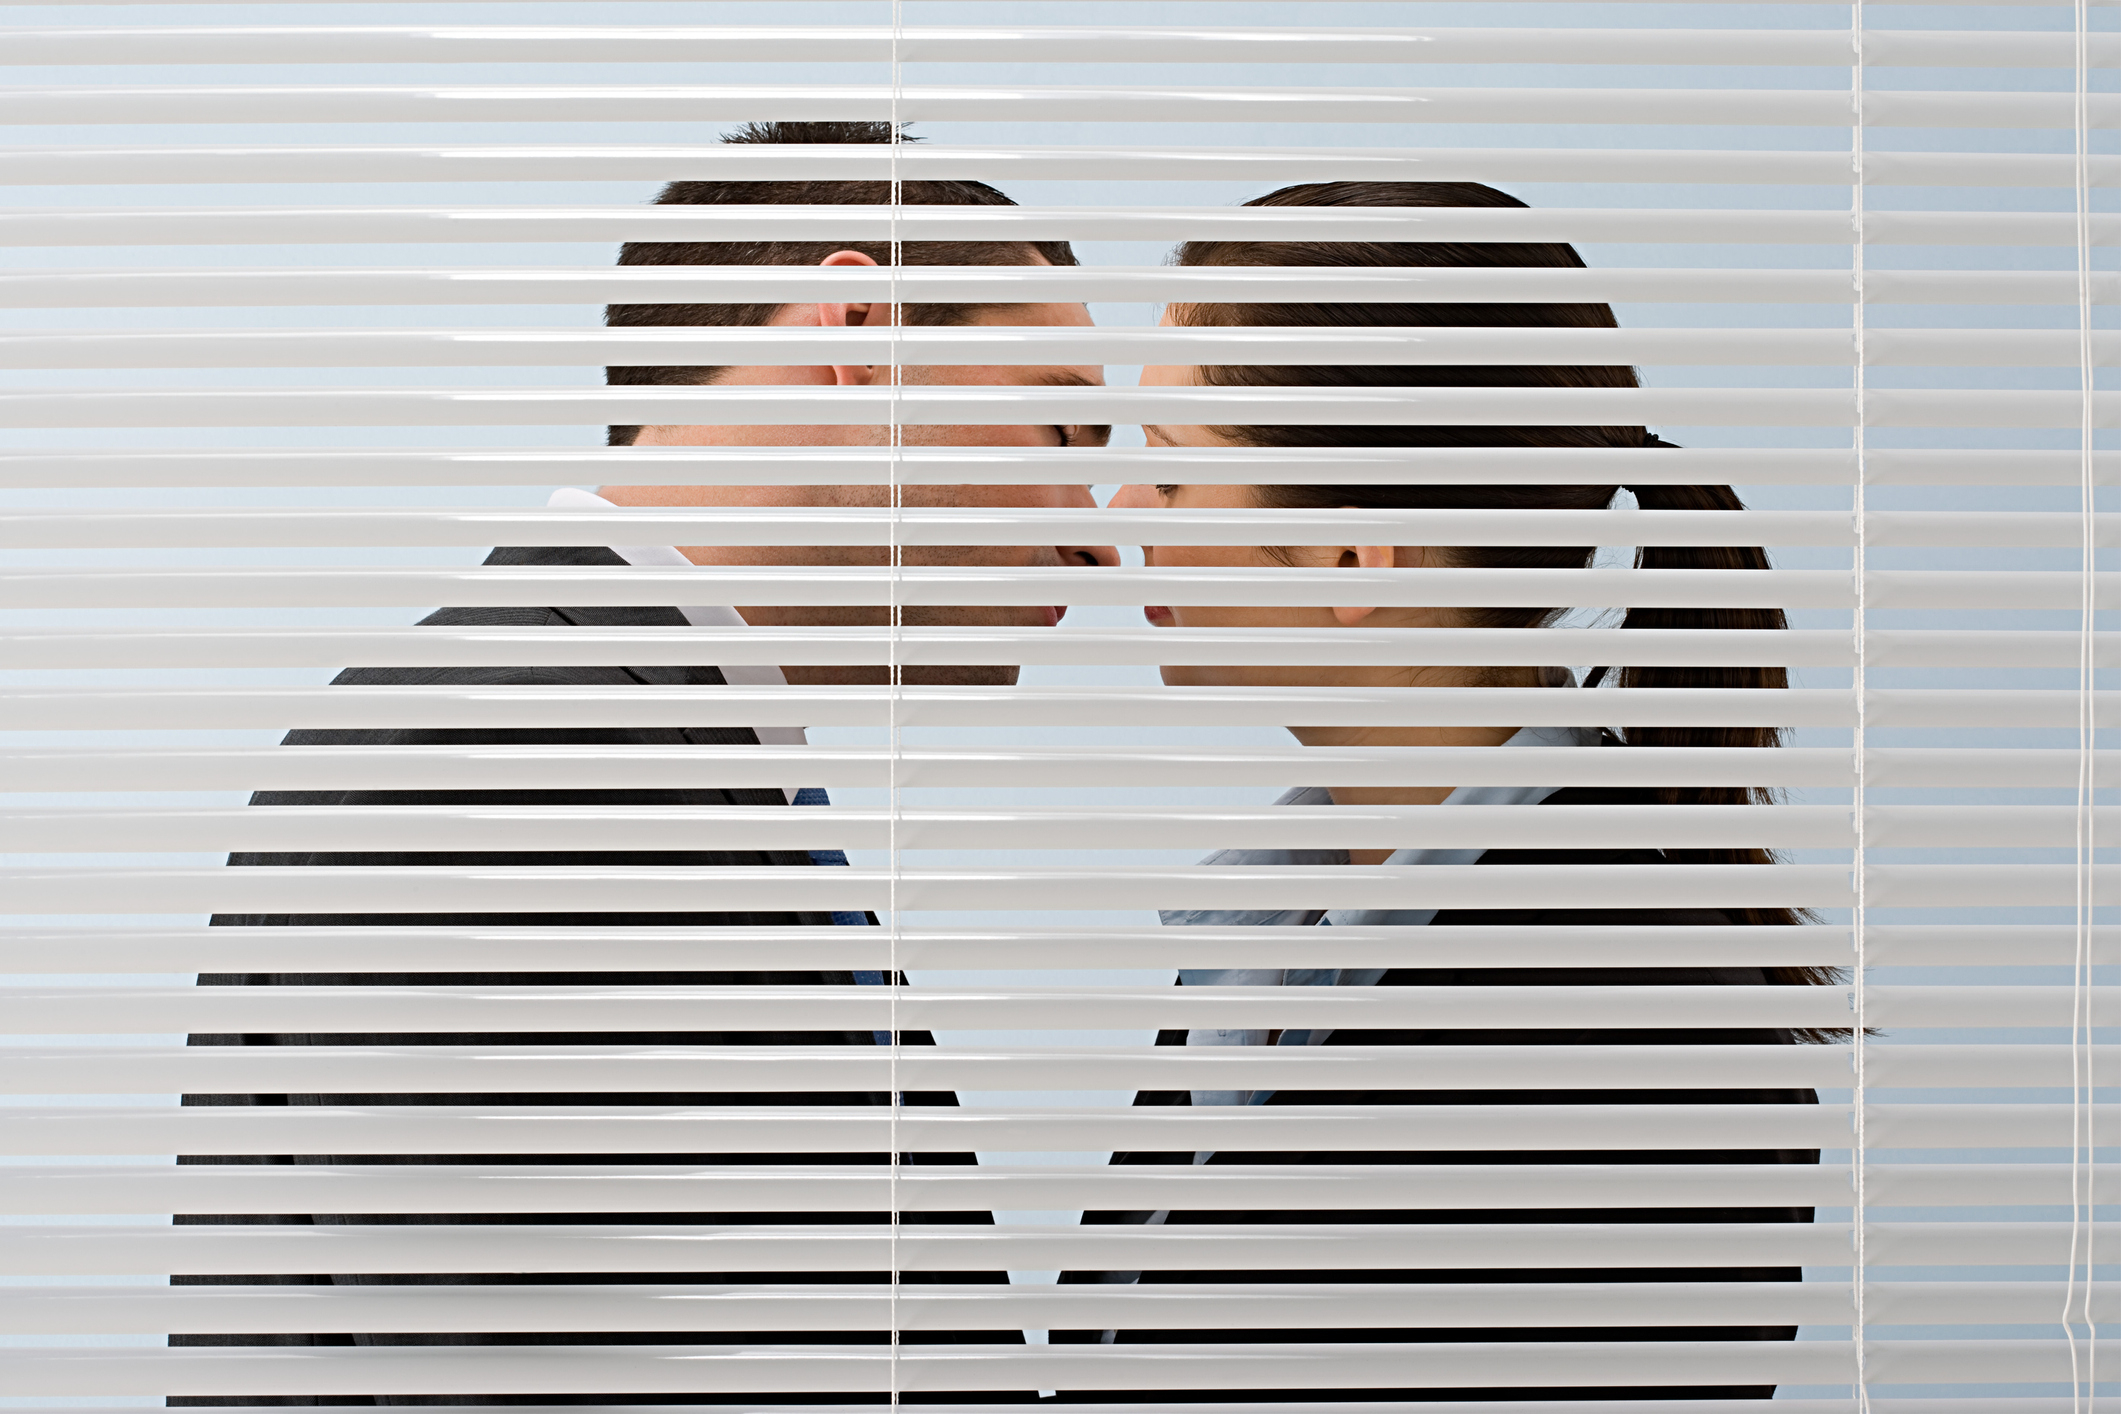 Coworkers about to kiss behind some blinds